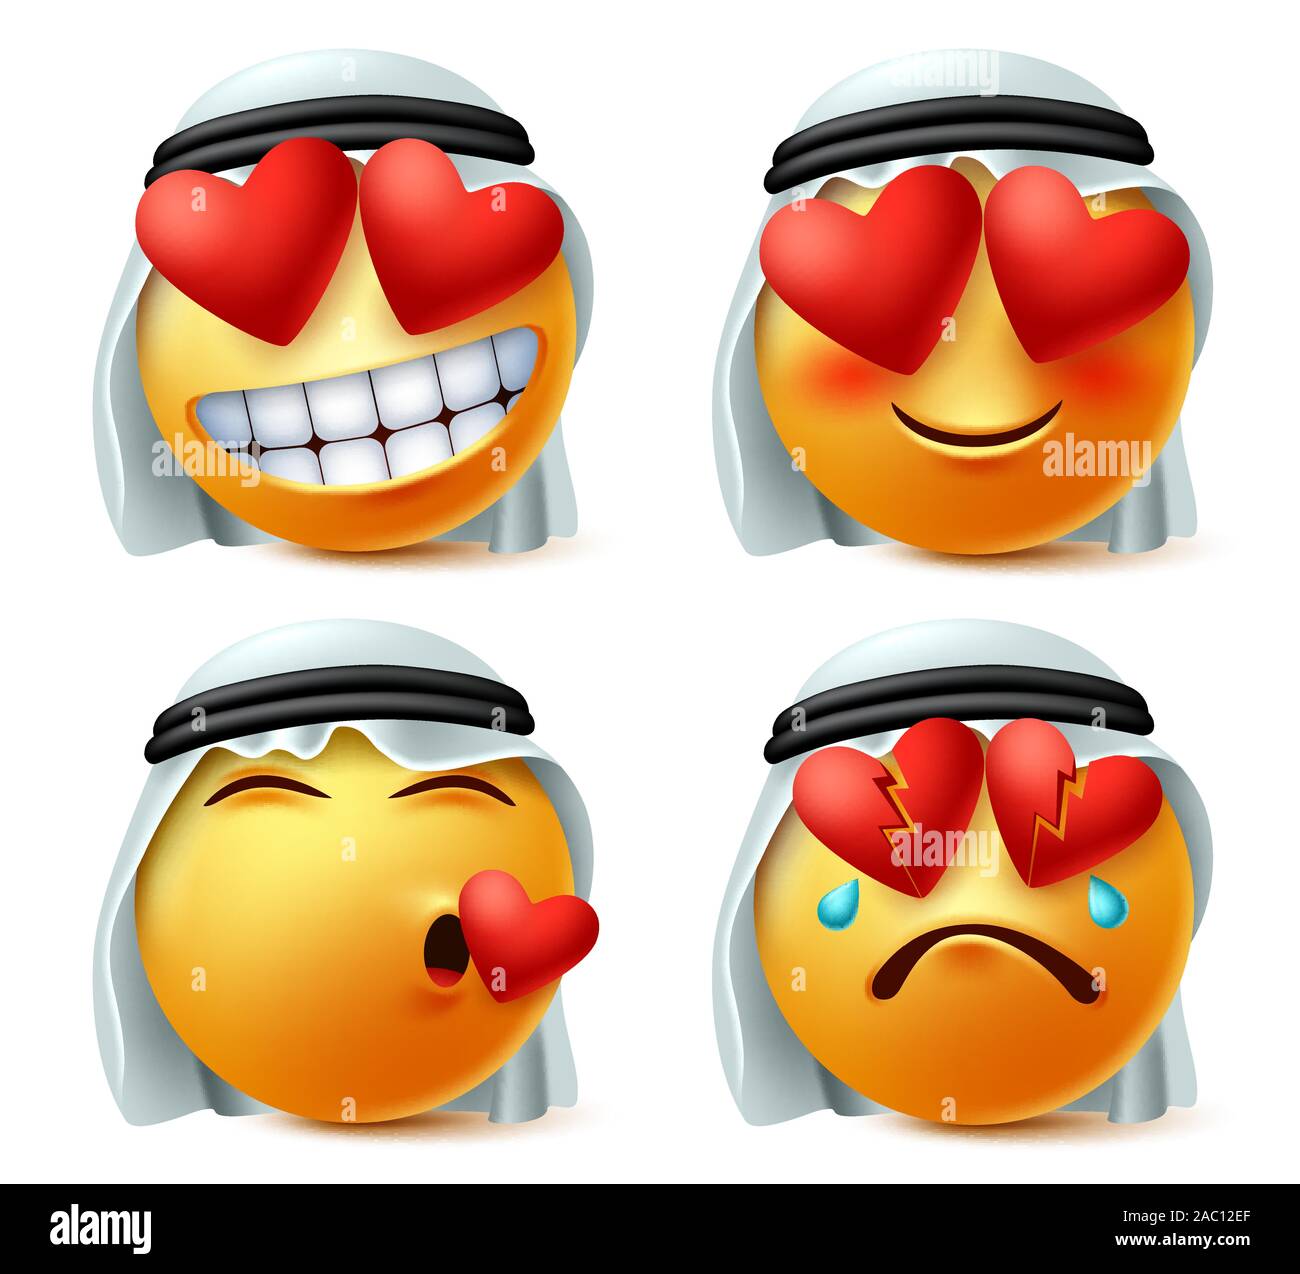 Arab smileys of heart and love vector emoticon set. Saudi arabian smiley emoticon cute face in in love, broken, hurt and loved expression wearing. Stock Vector